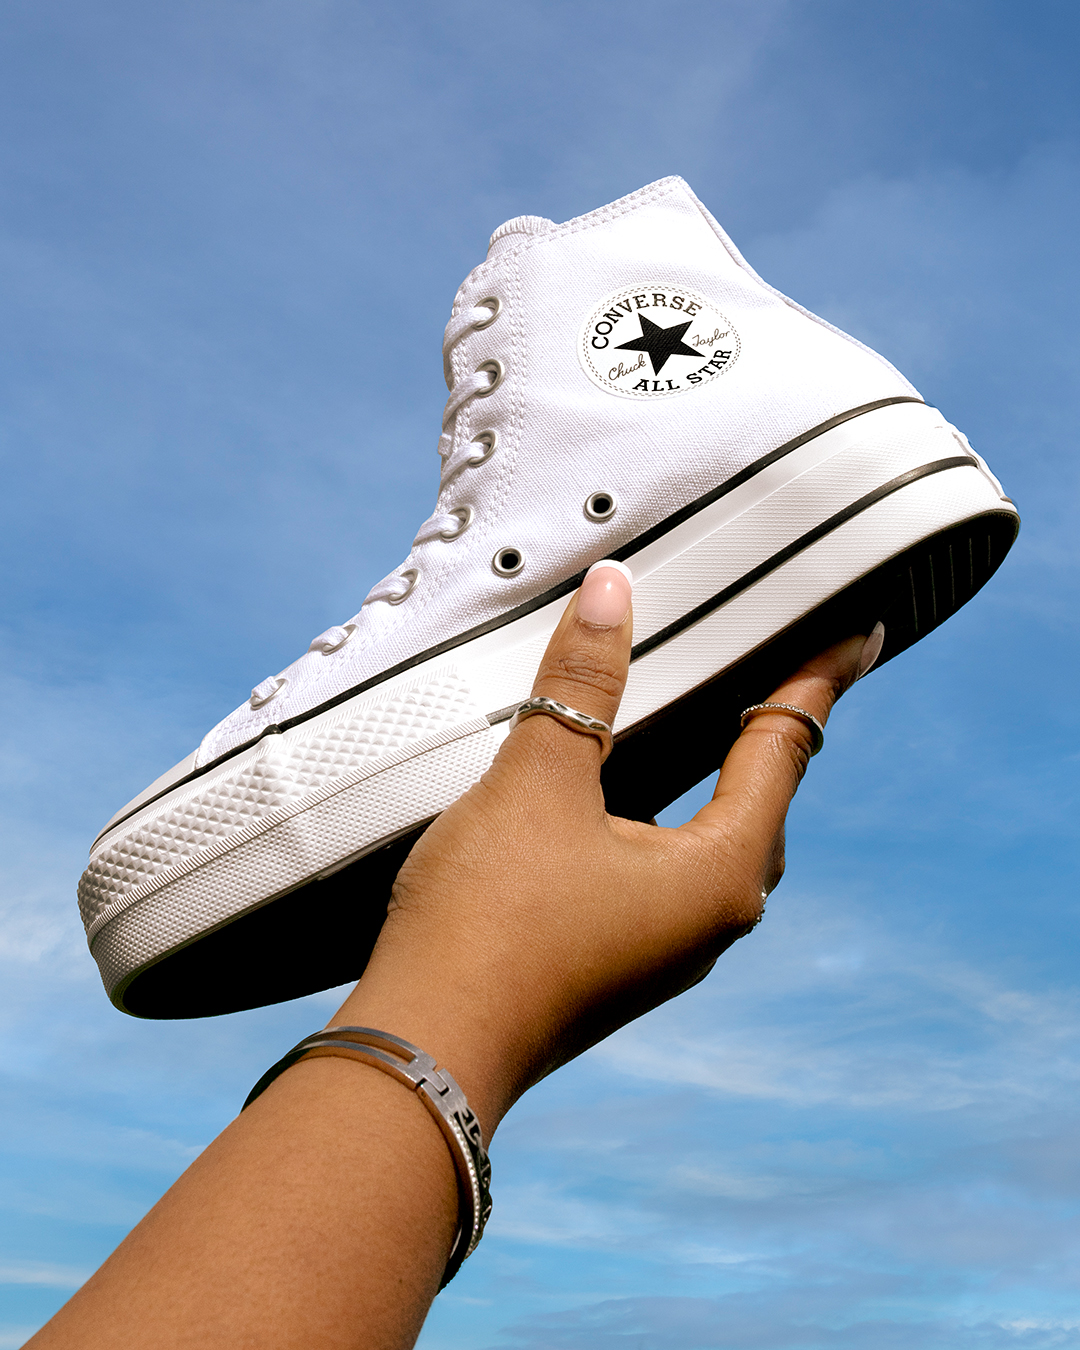 Converse All Star Hi in White Being Held in the Air